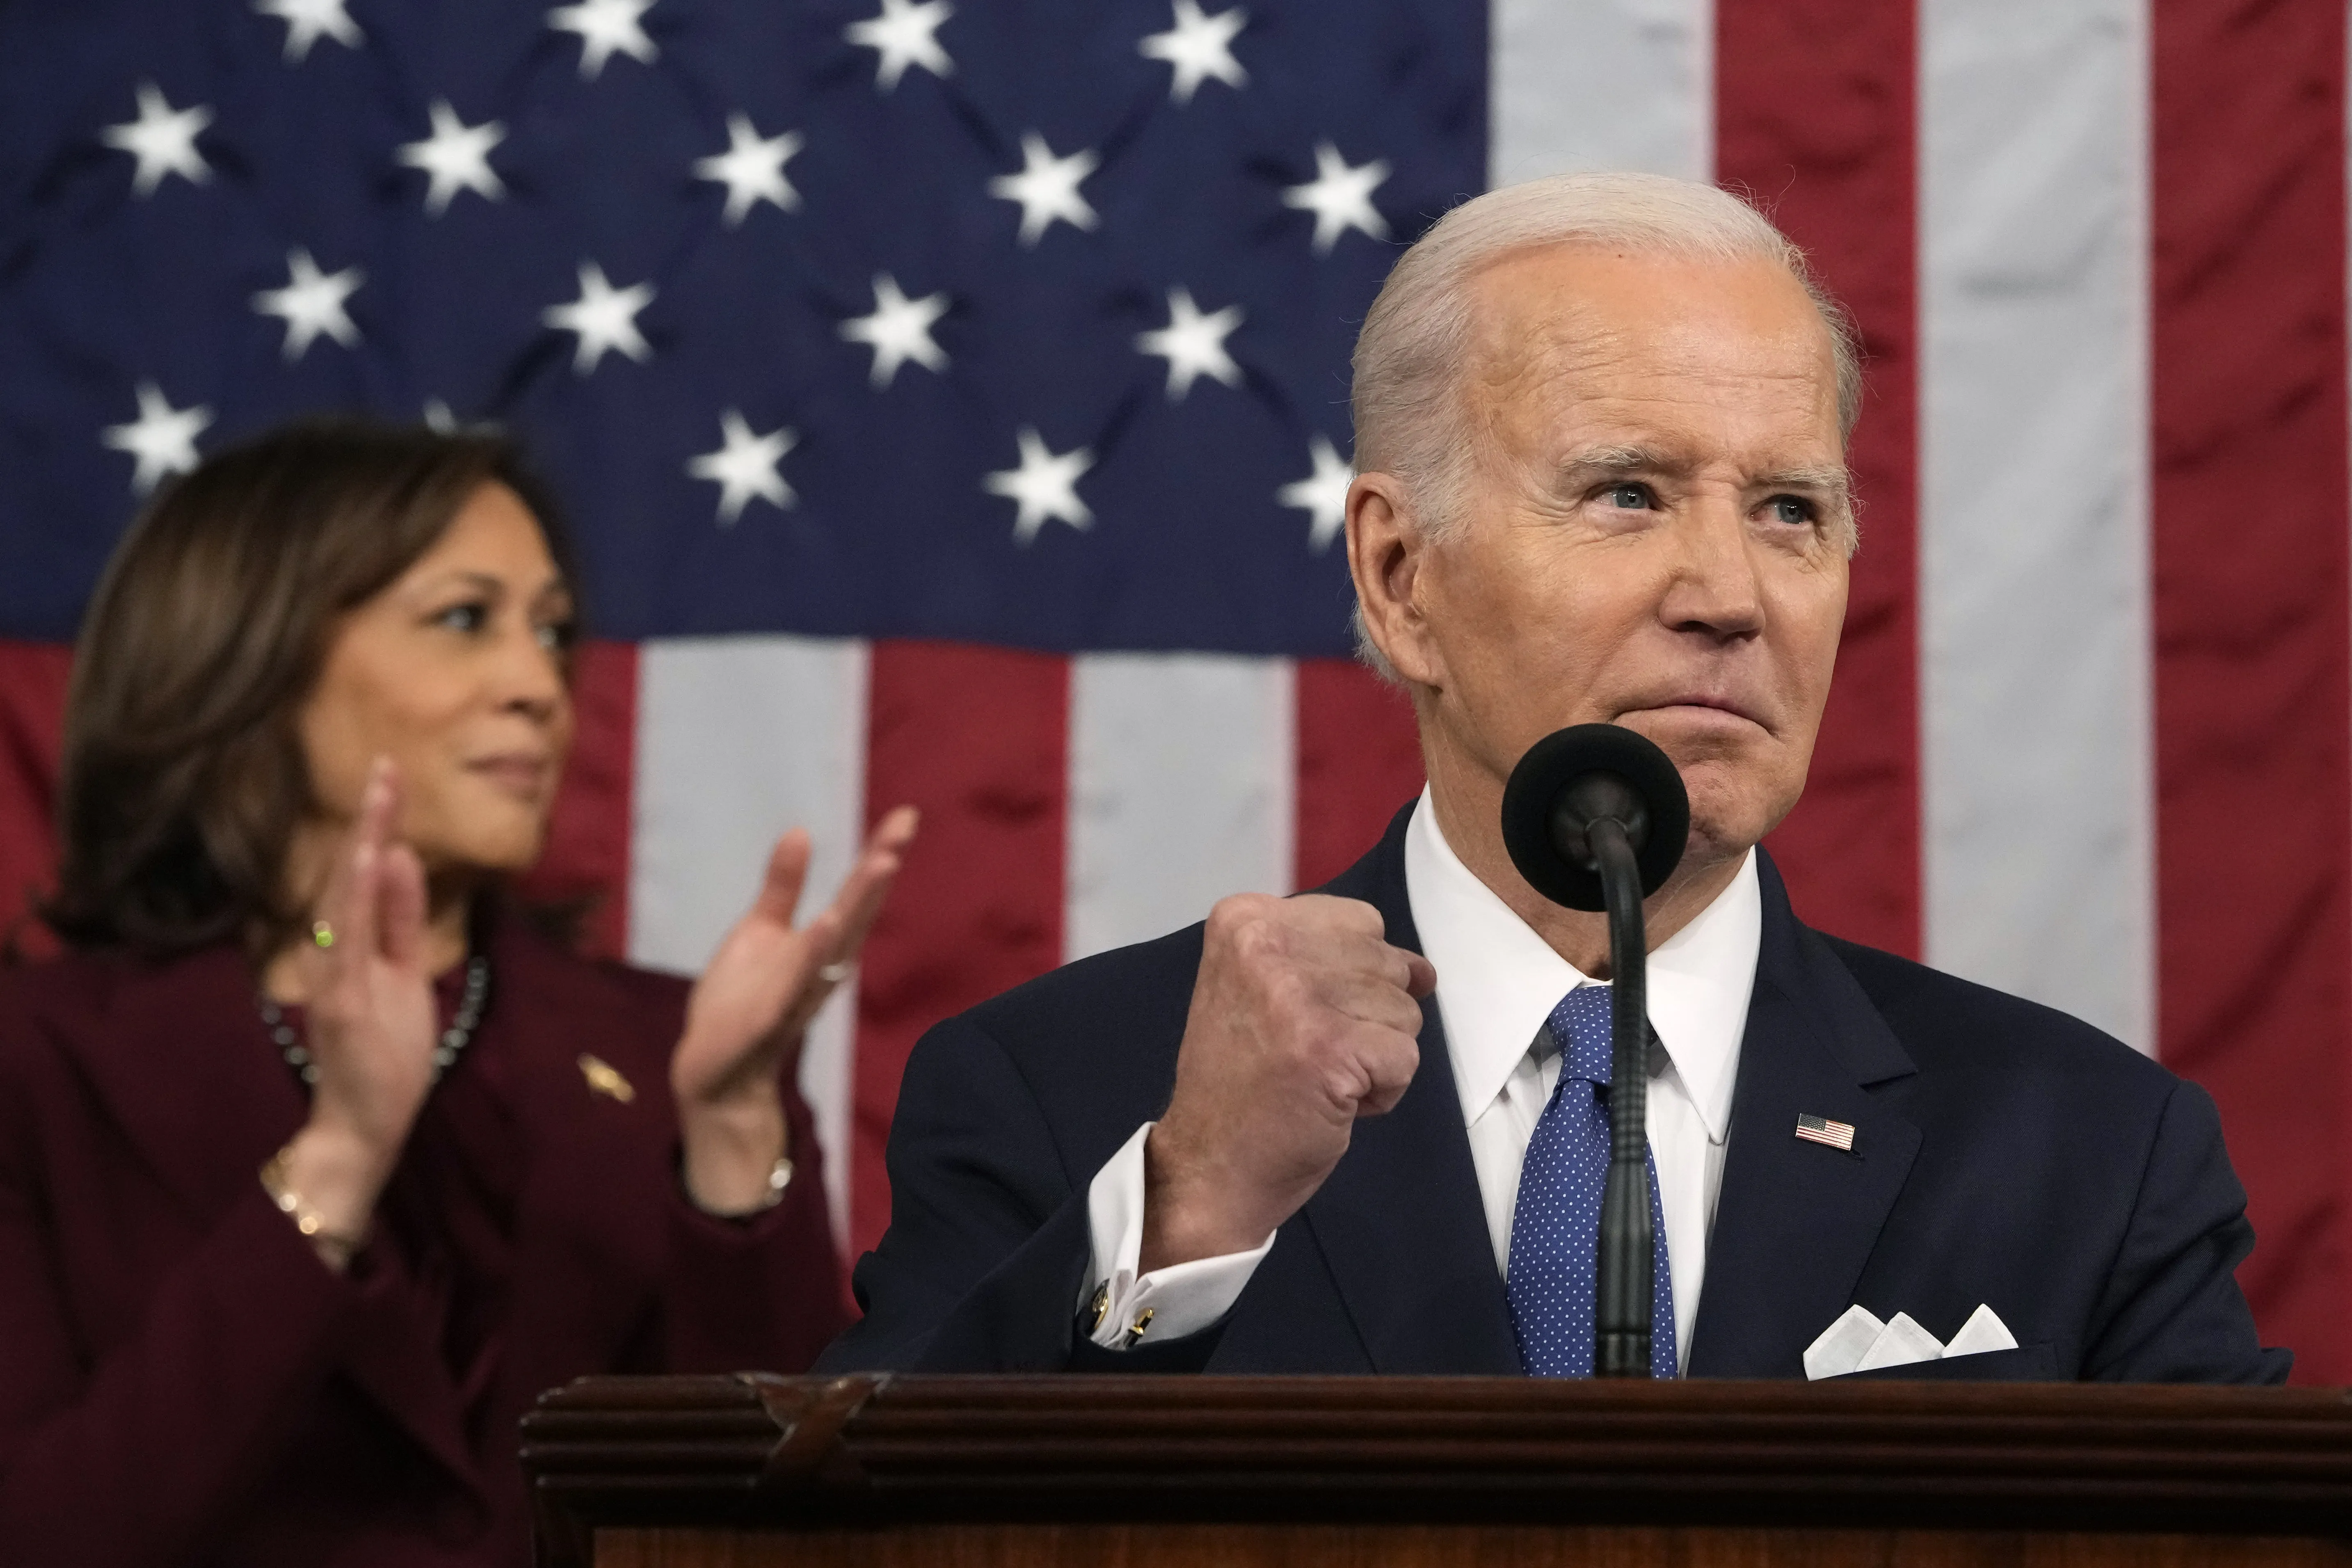 U.S. President Joe Biden is shown here delivering his 2023 State of the Union address before a joint session of the United States Congress.?w=200&h=150